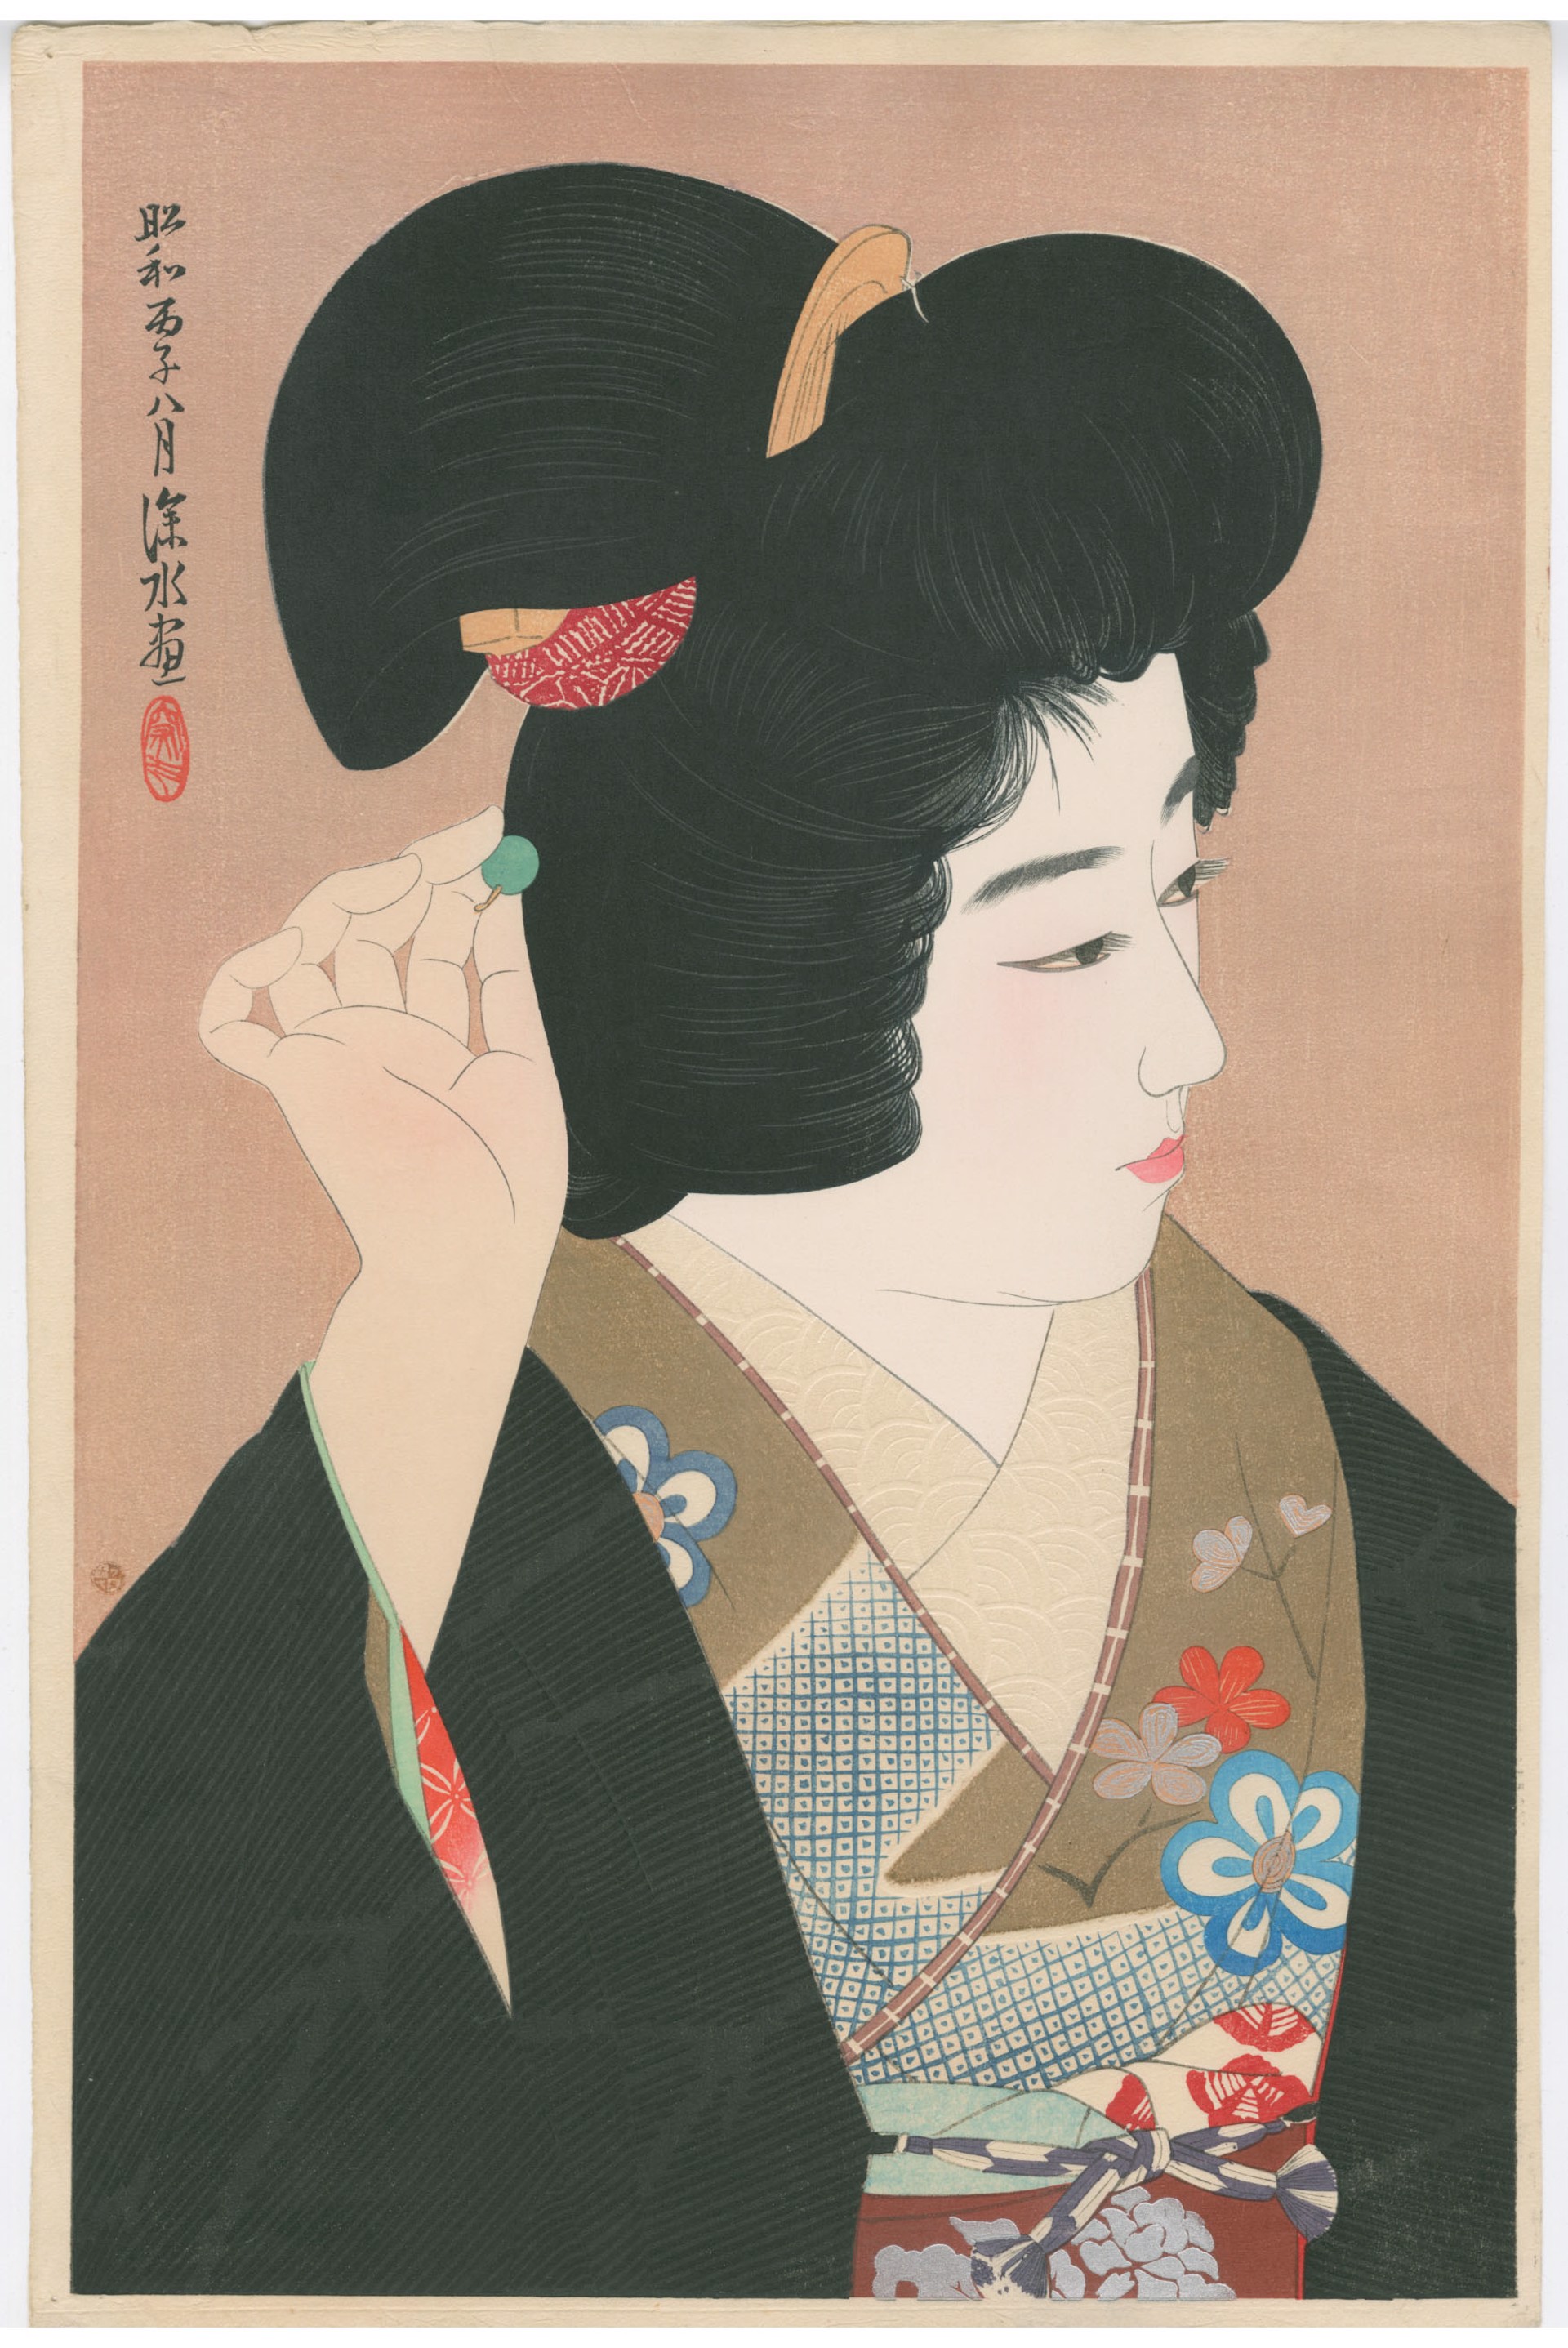 Pupil of the Eye 2nd Series of Modern Beauties by Shinsui